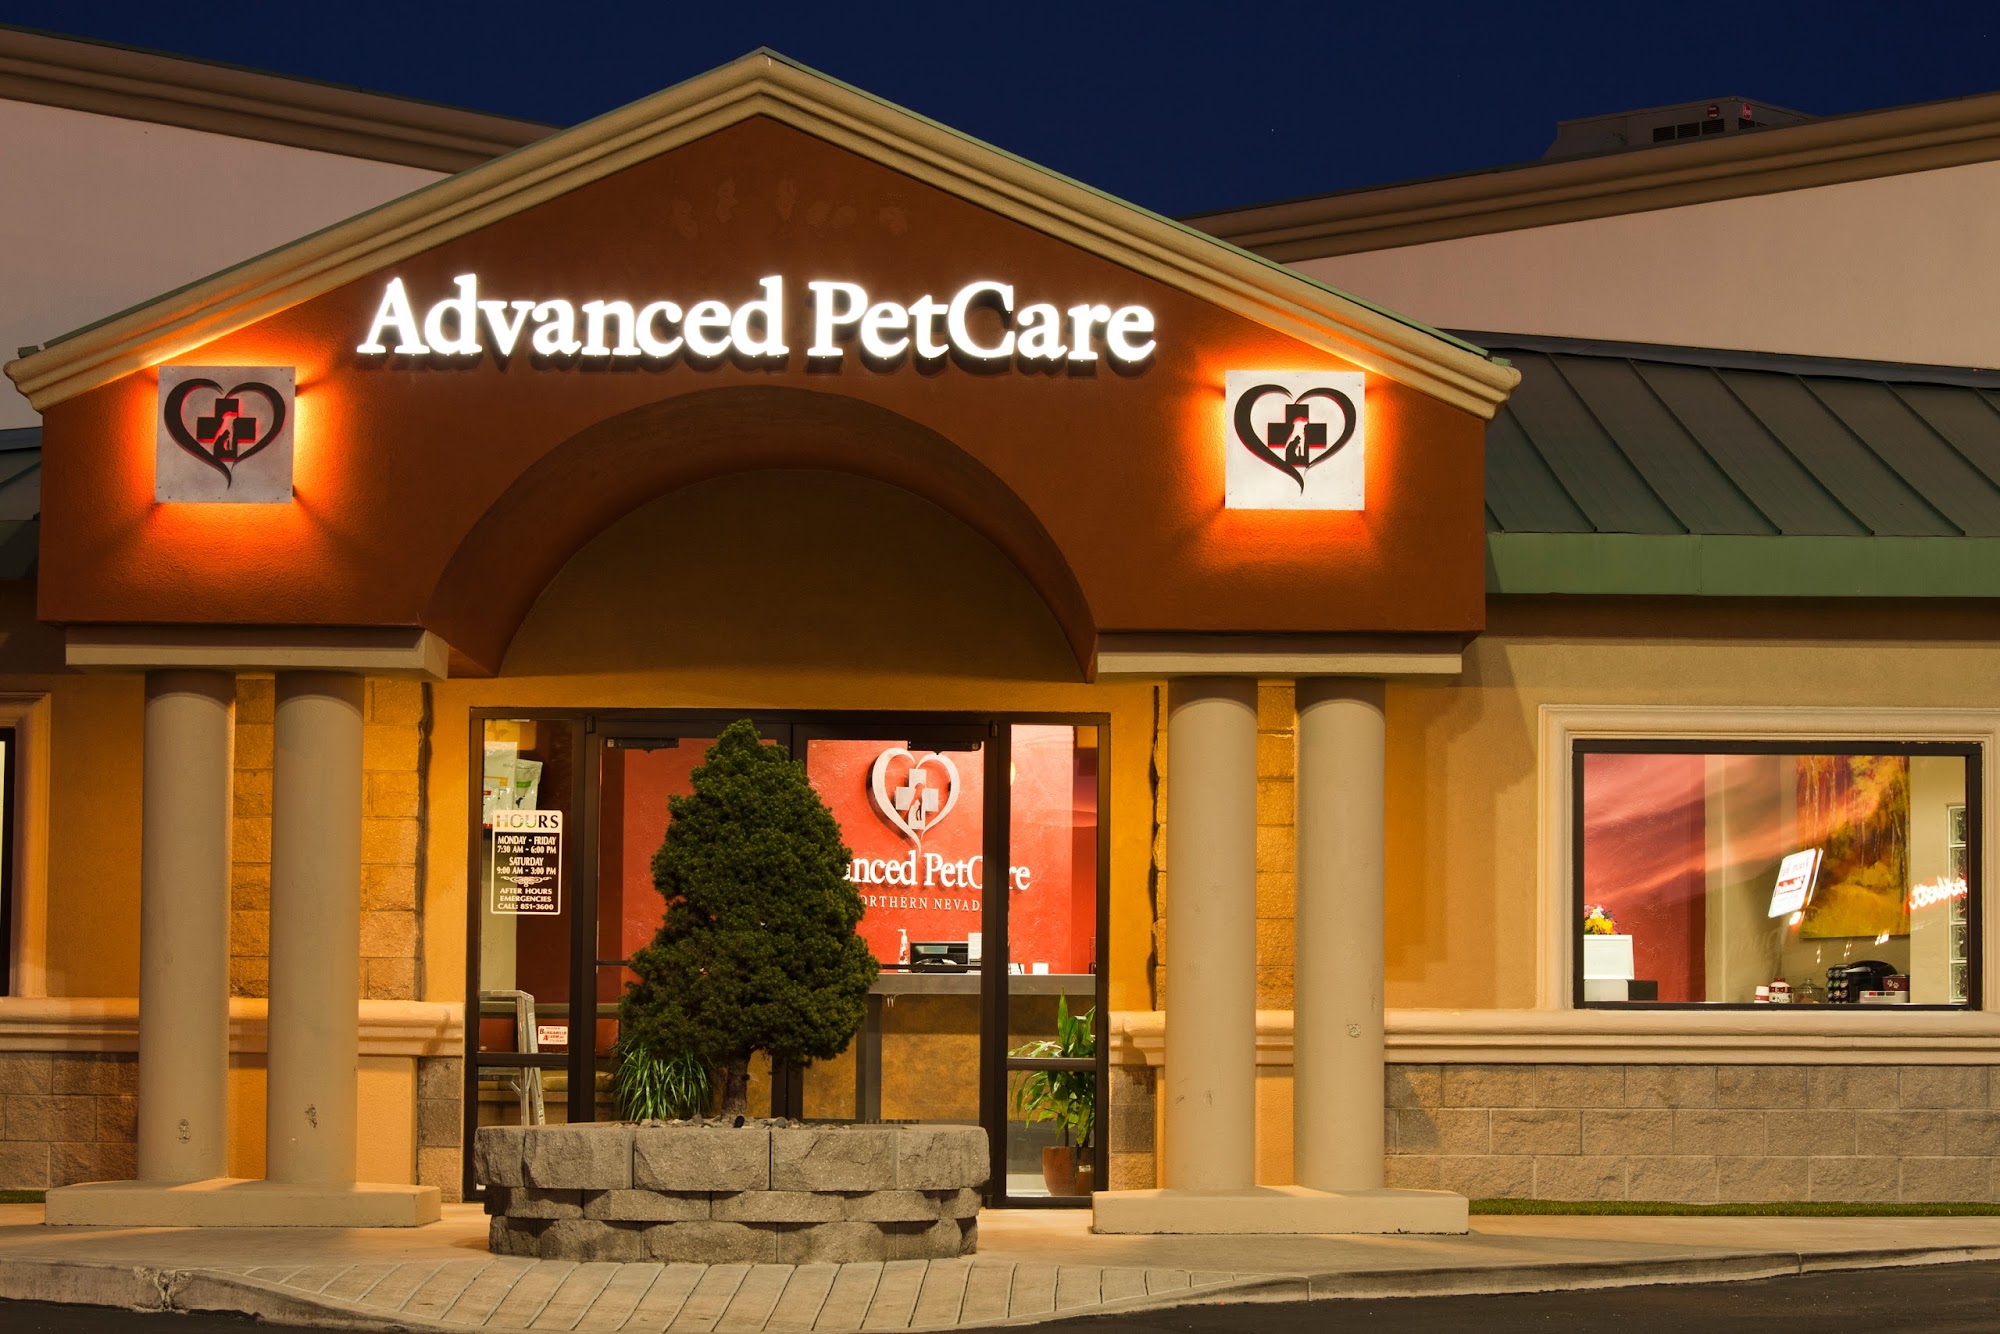 Advanced Pet Care Of Northern Nevada-Sparks